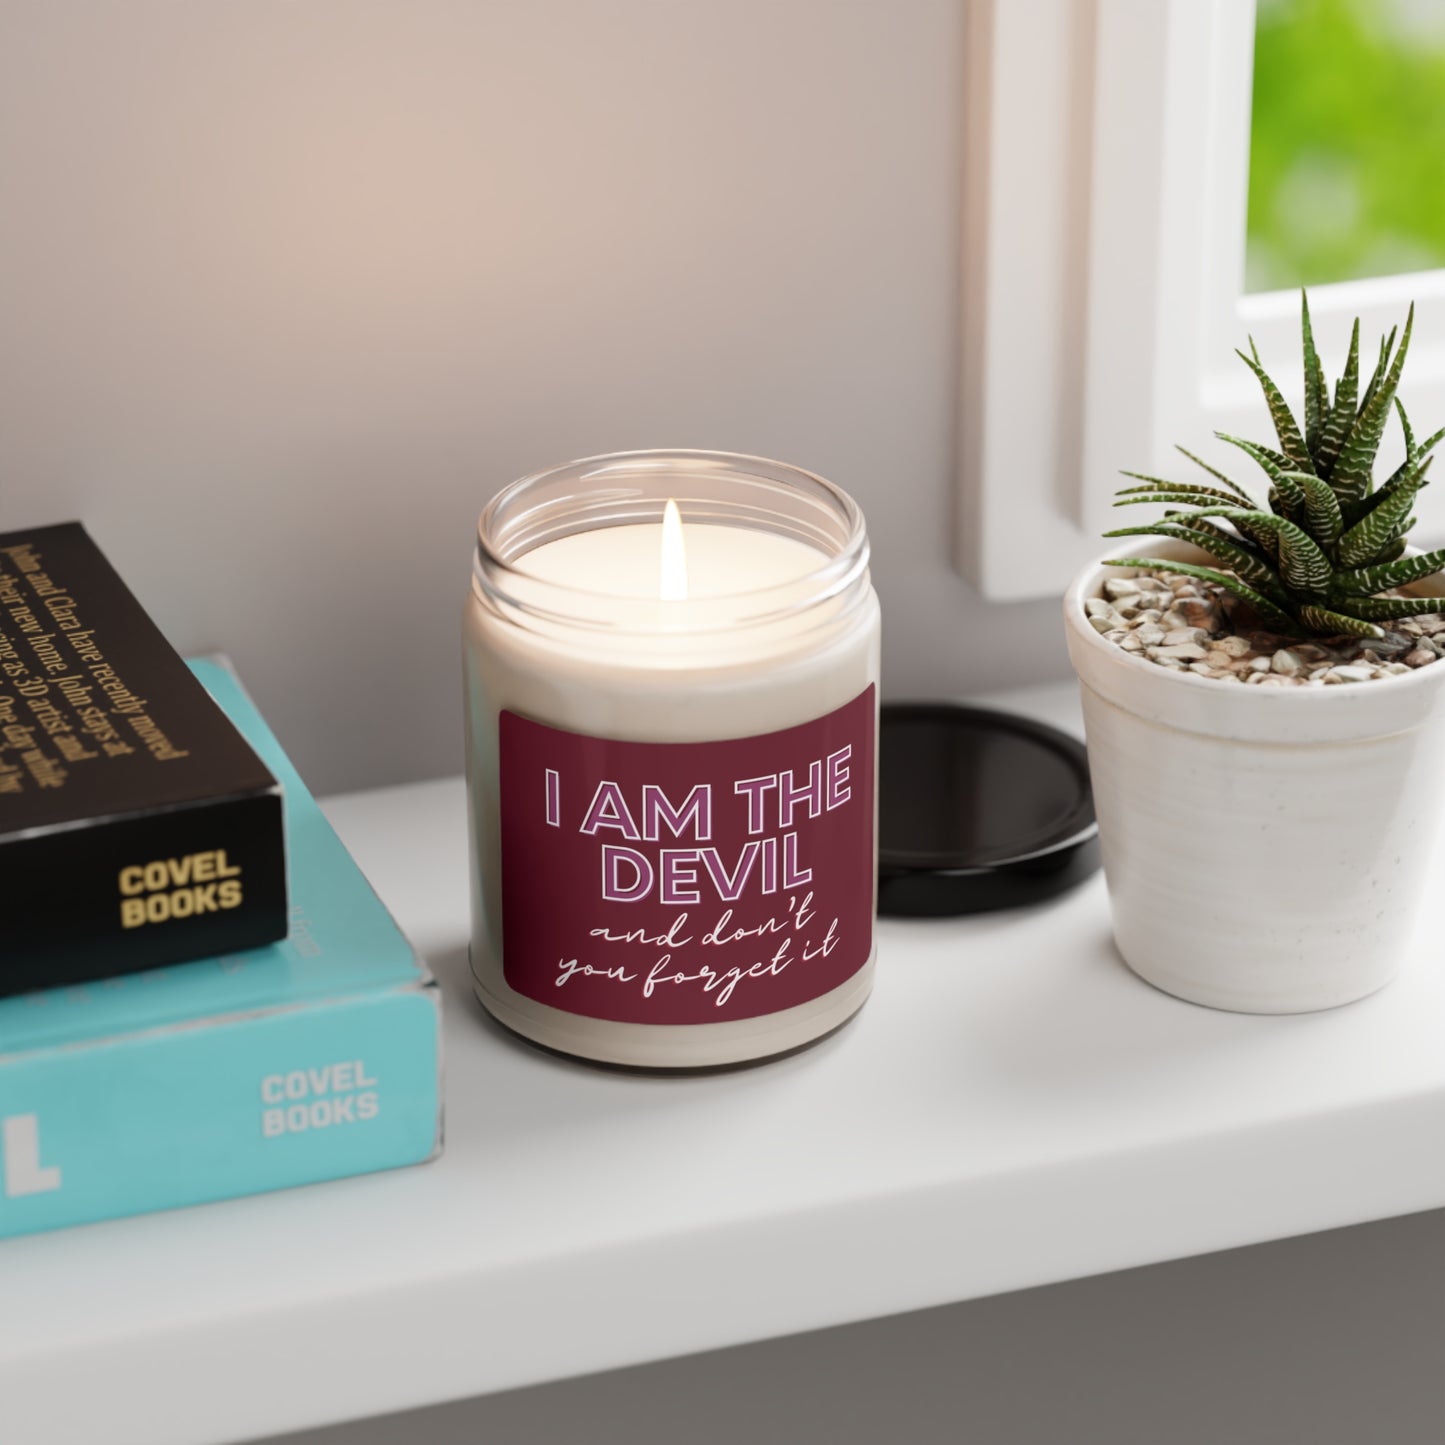 I am the devil and don't you forget it, Vanderpump Rules, Bravo TV, Scented Soy Candle, 9oz